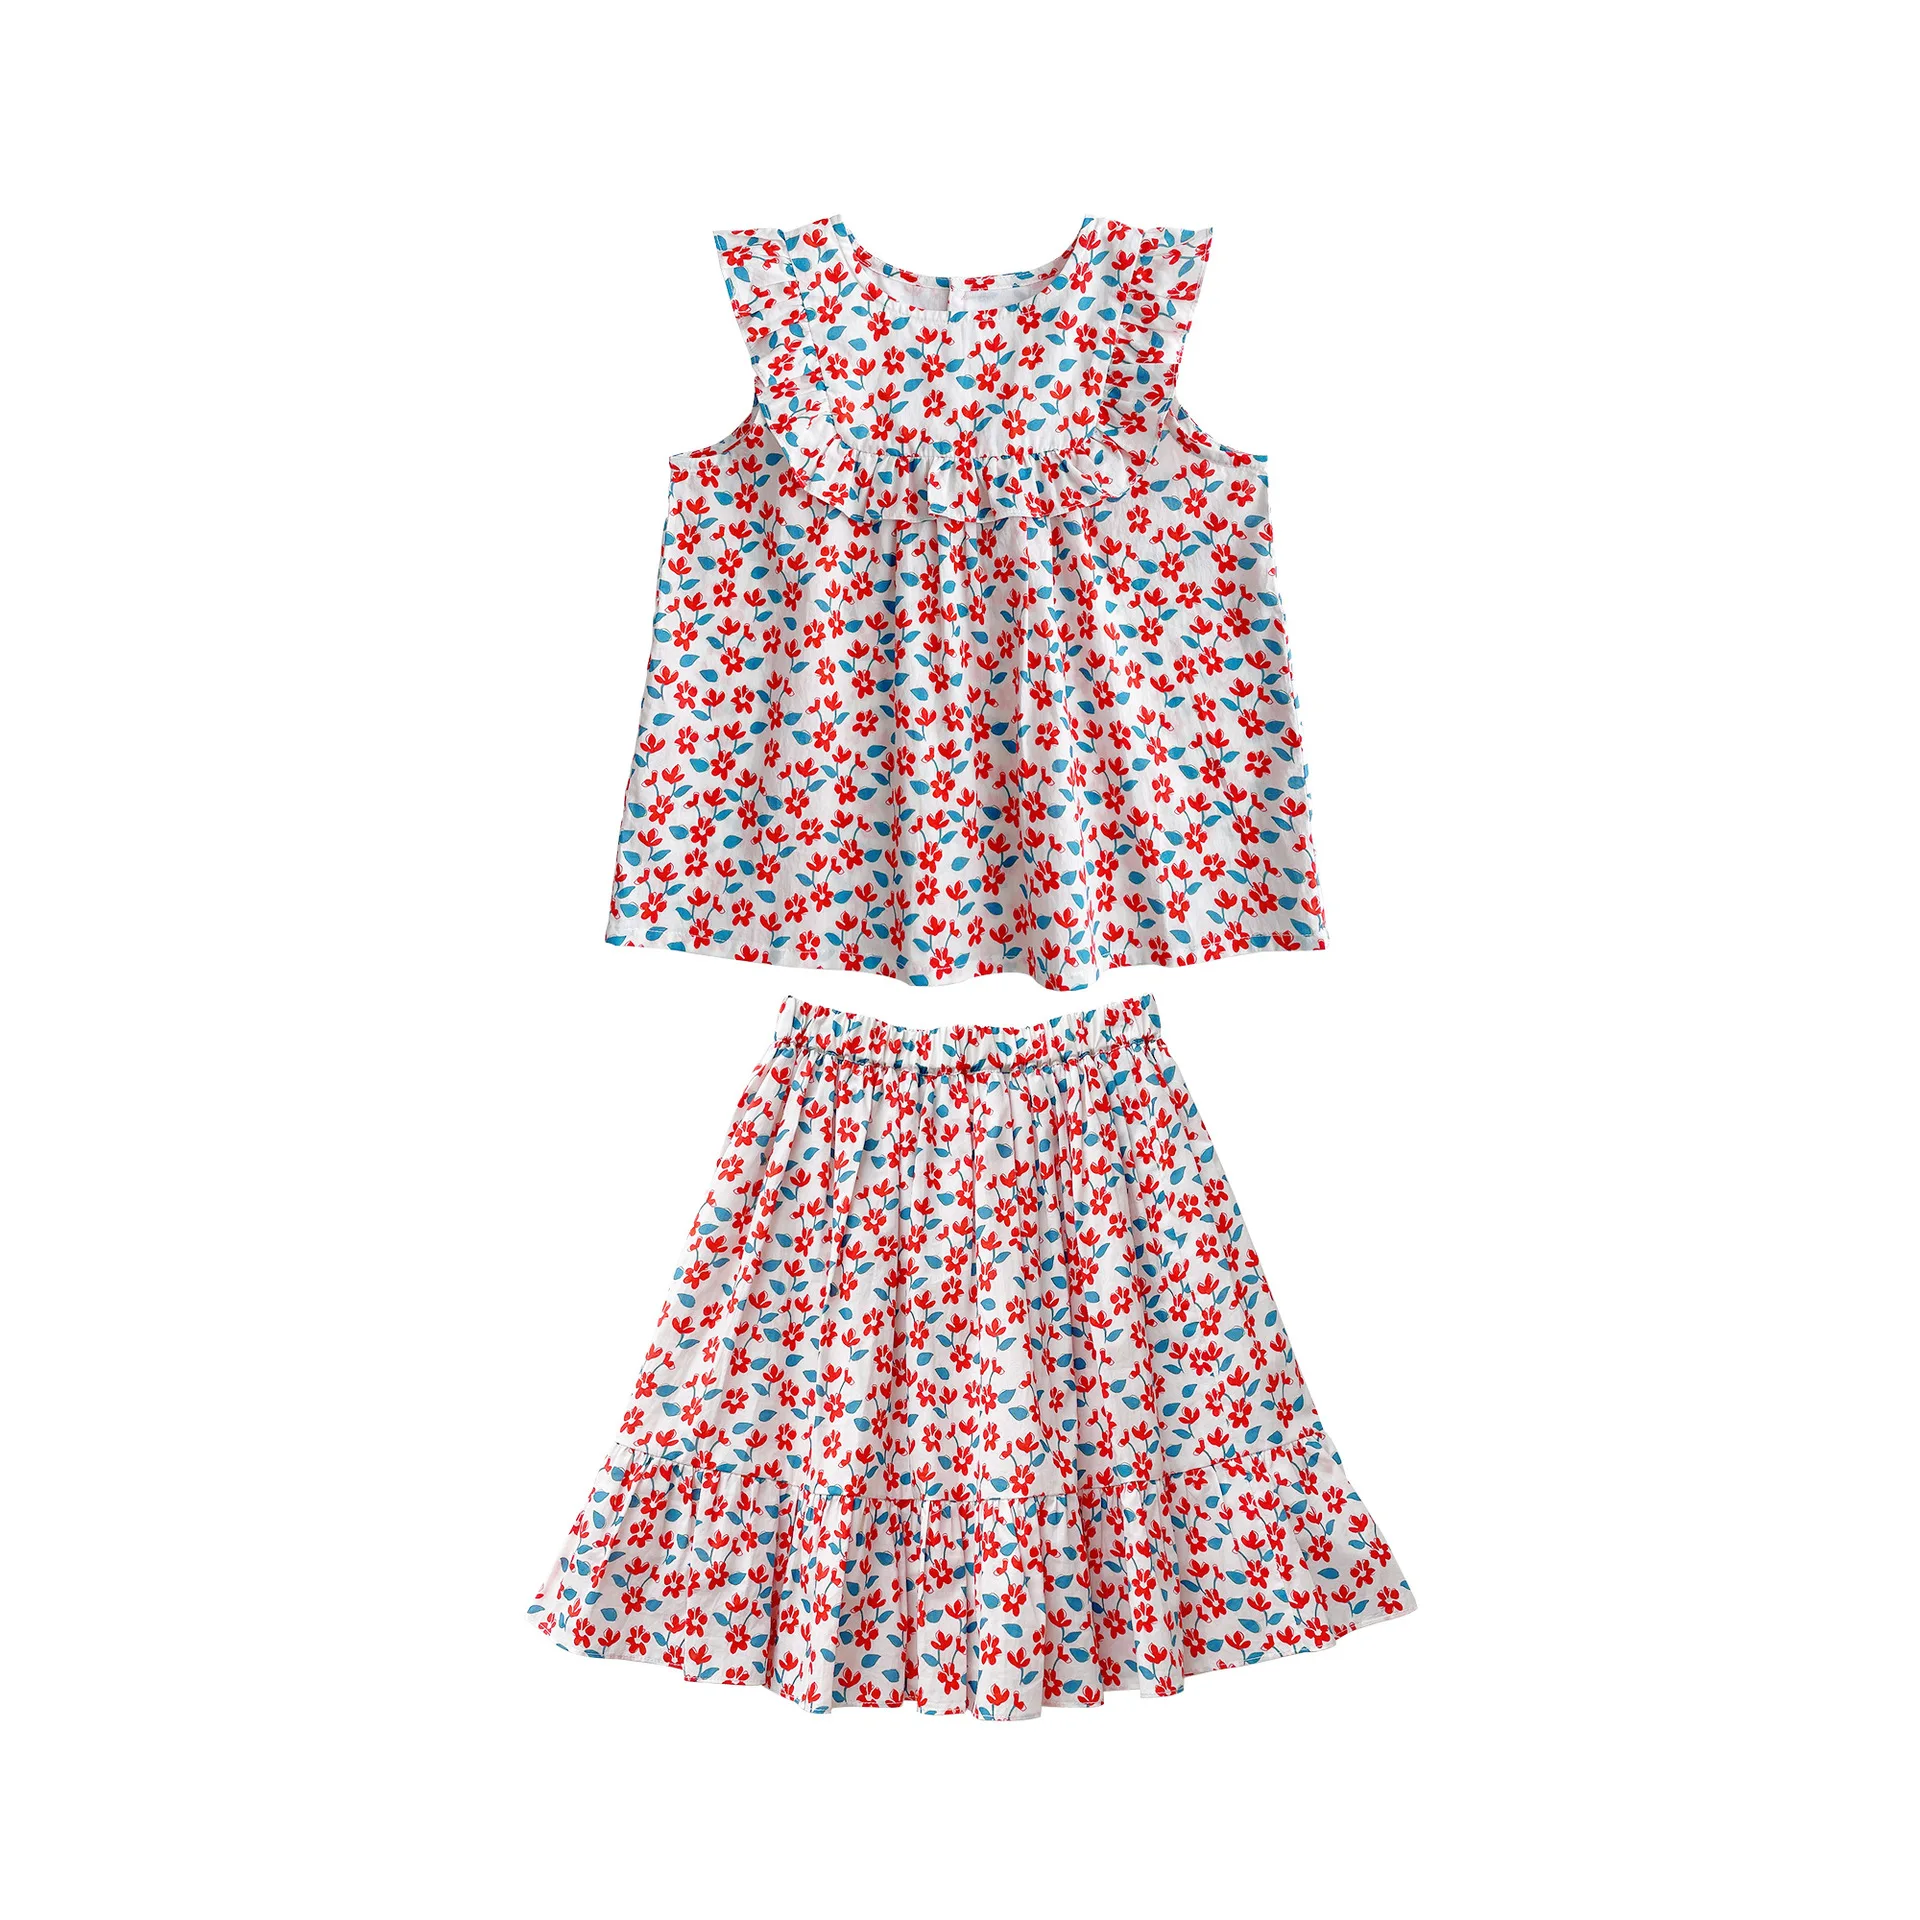 children's clothing sets expensive Spot 2022 spring and summer newBP girl red small floral suit sleeveless two-piece Clothing Sets for children Clothing Sets